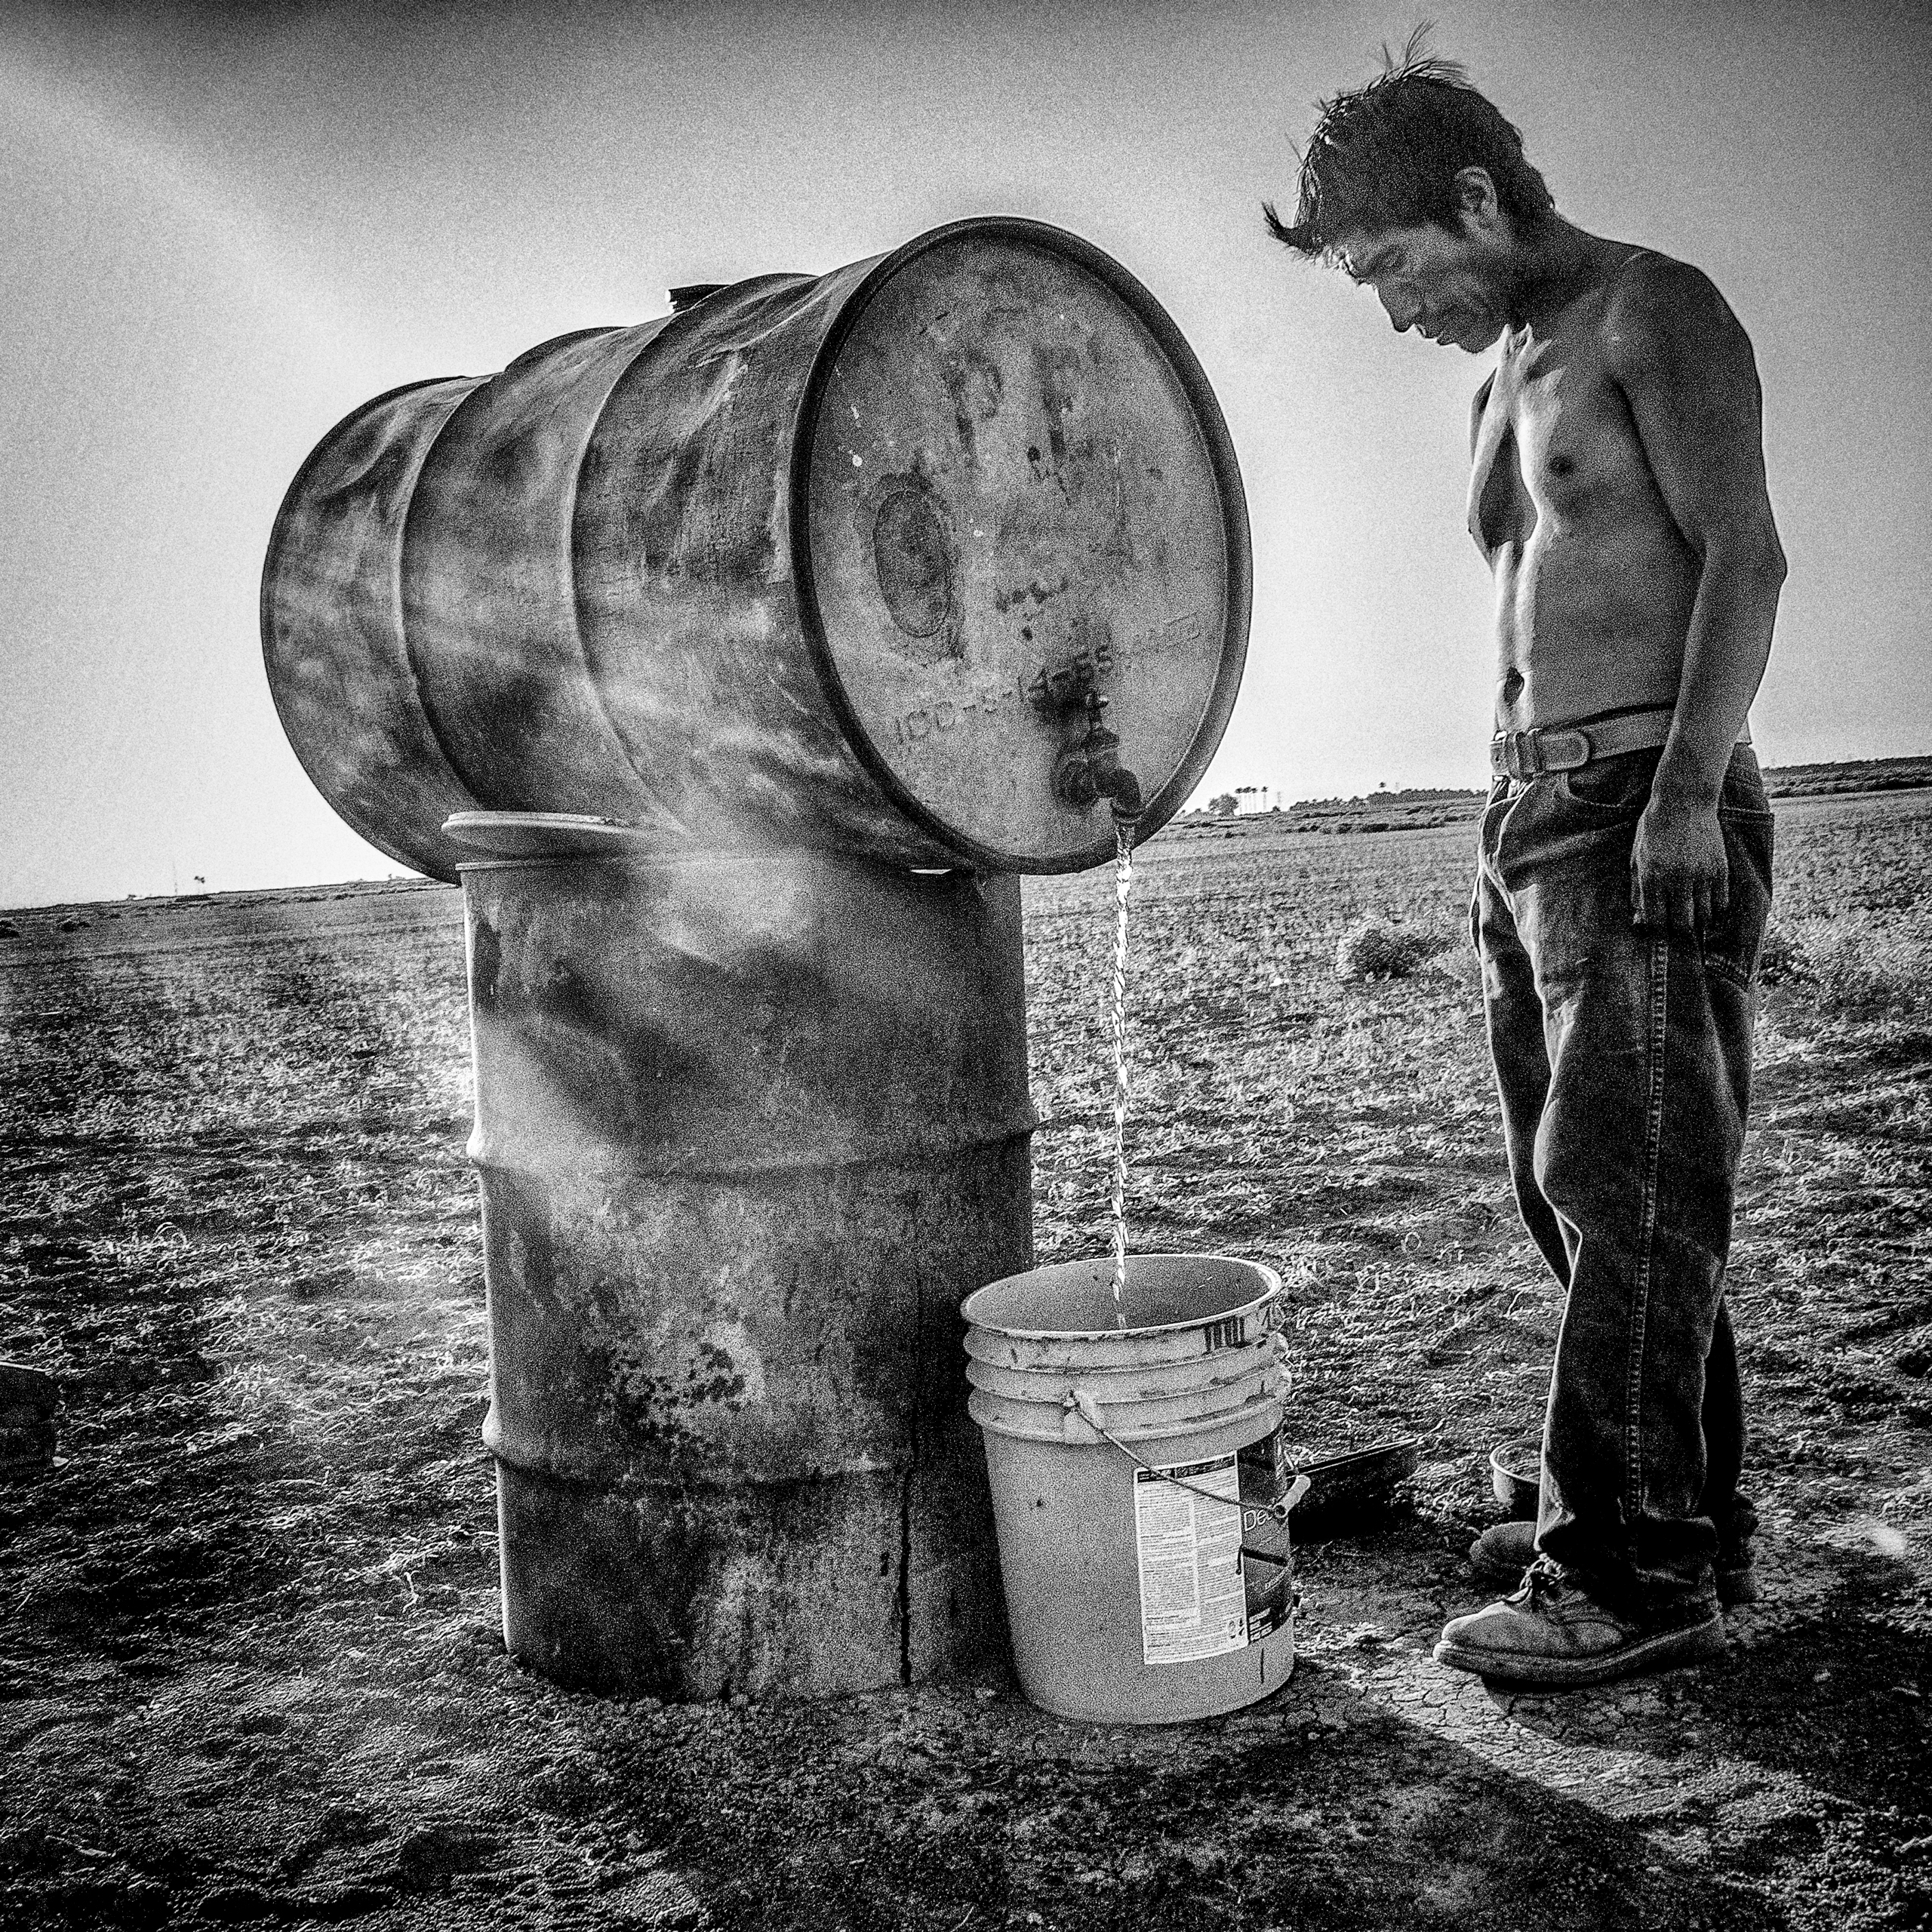 A shepherd's camp in a dry wheat field.  Mendota, CA.  His water for drinking, bathing and cooking comes from this 55-gallon drum.